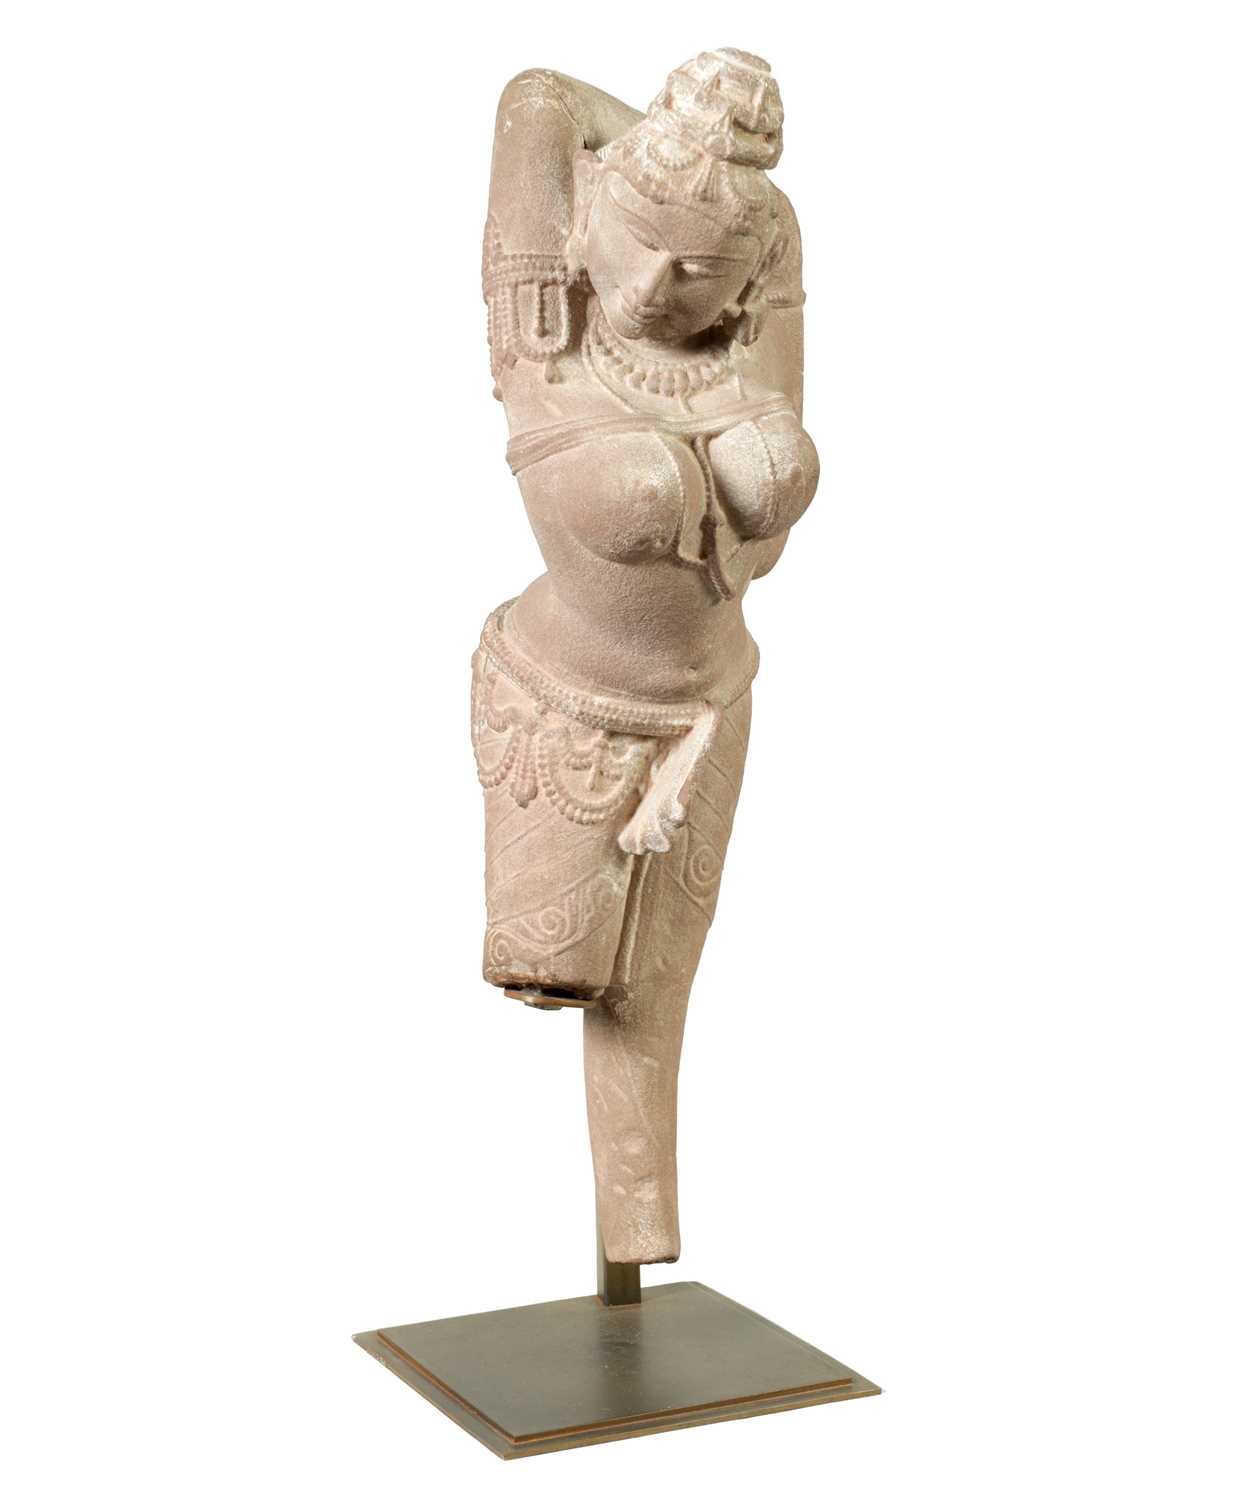 A 12TH CENTURY CARVED RED SANDSTONE NORTHERN INDIAN APSARA FIGURE